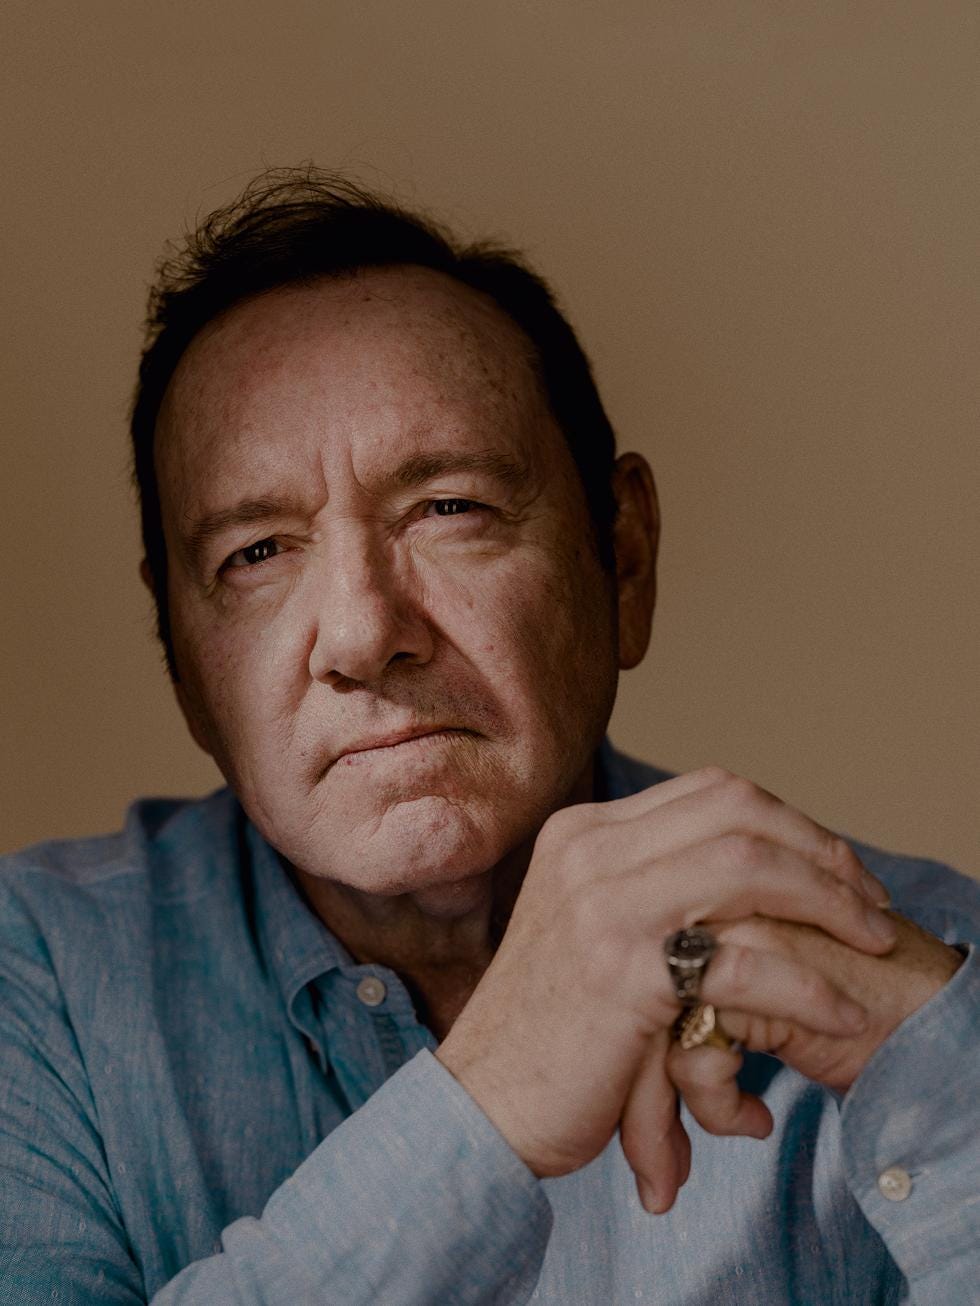 Kevin Spacey: Kevin Spacey, 63, in Baltimore, where he has lived for 11 years